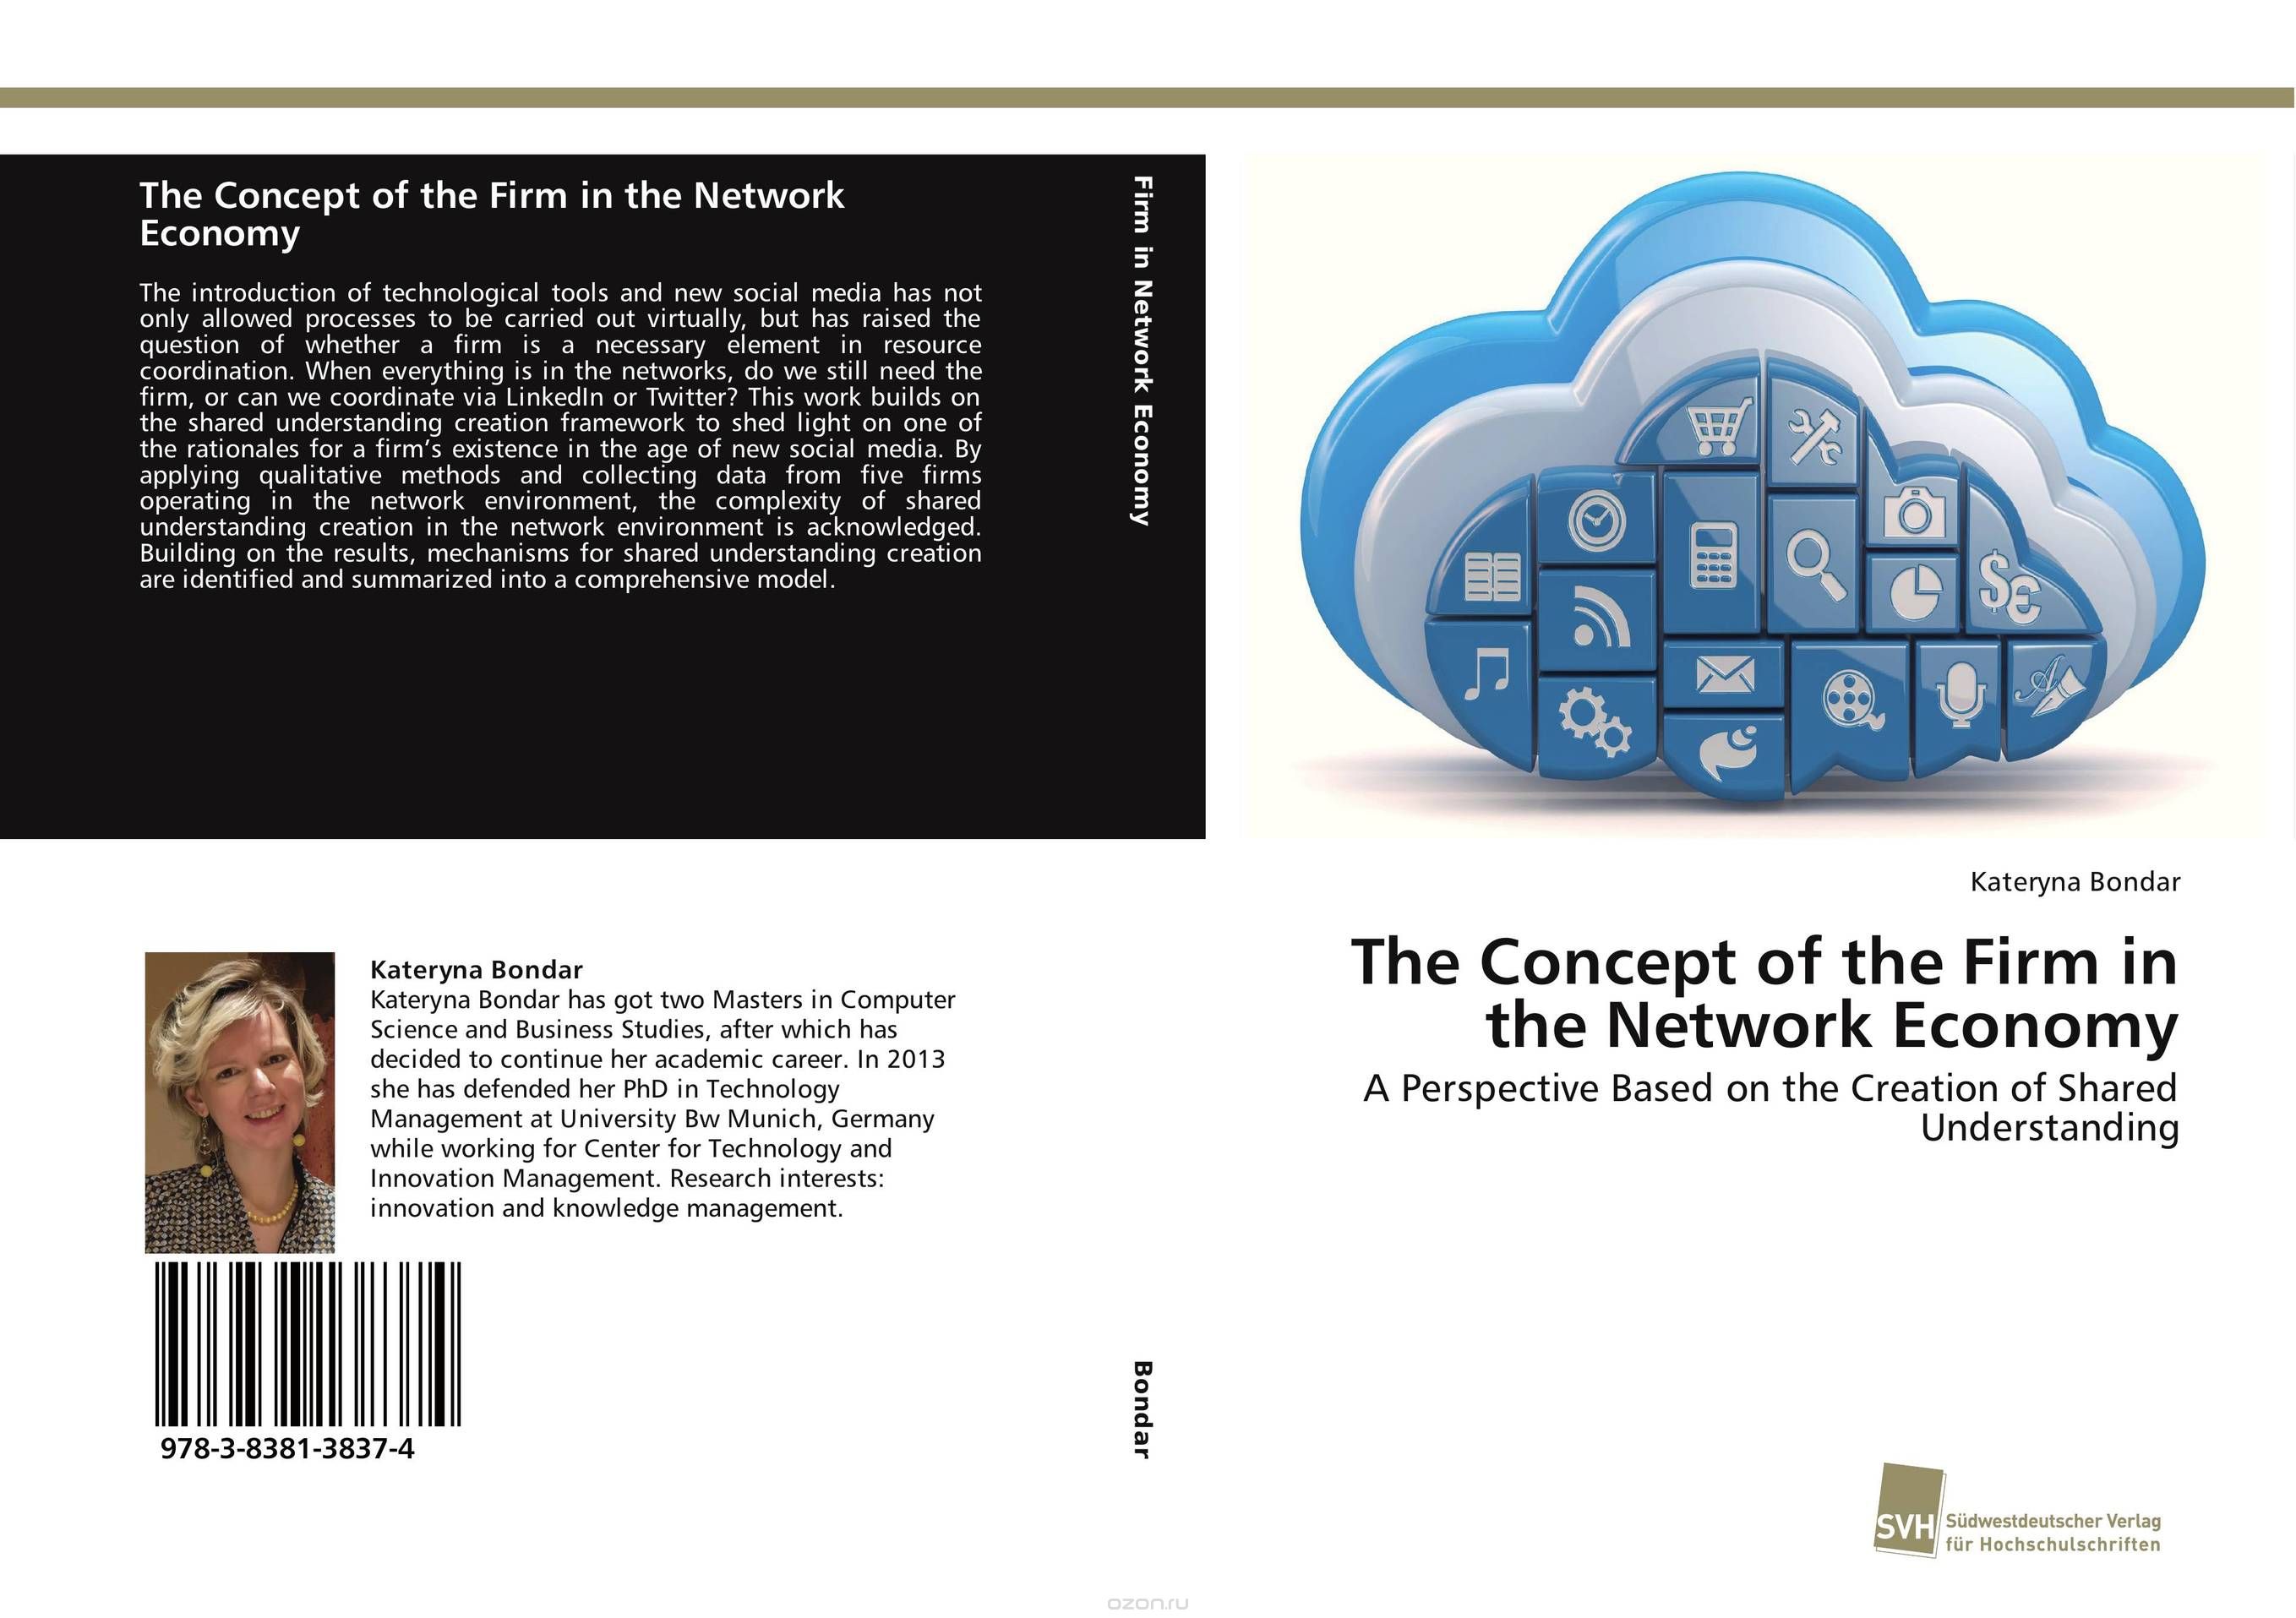 Скачать книгу "The Concept of the Firm in the Network Economy"